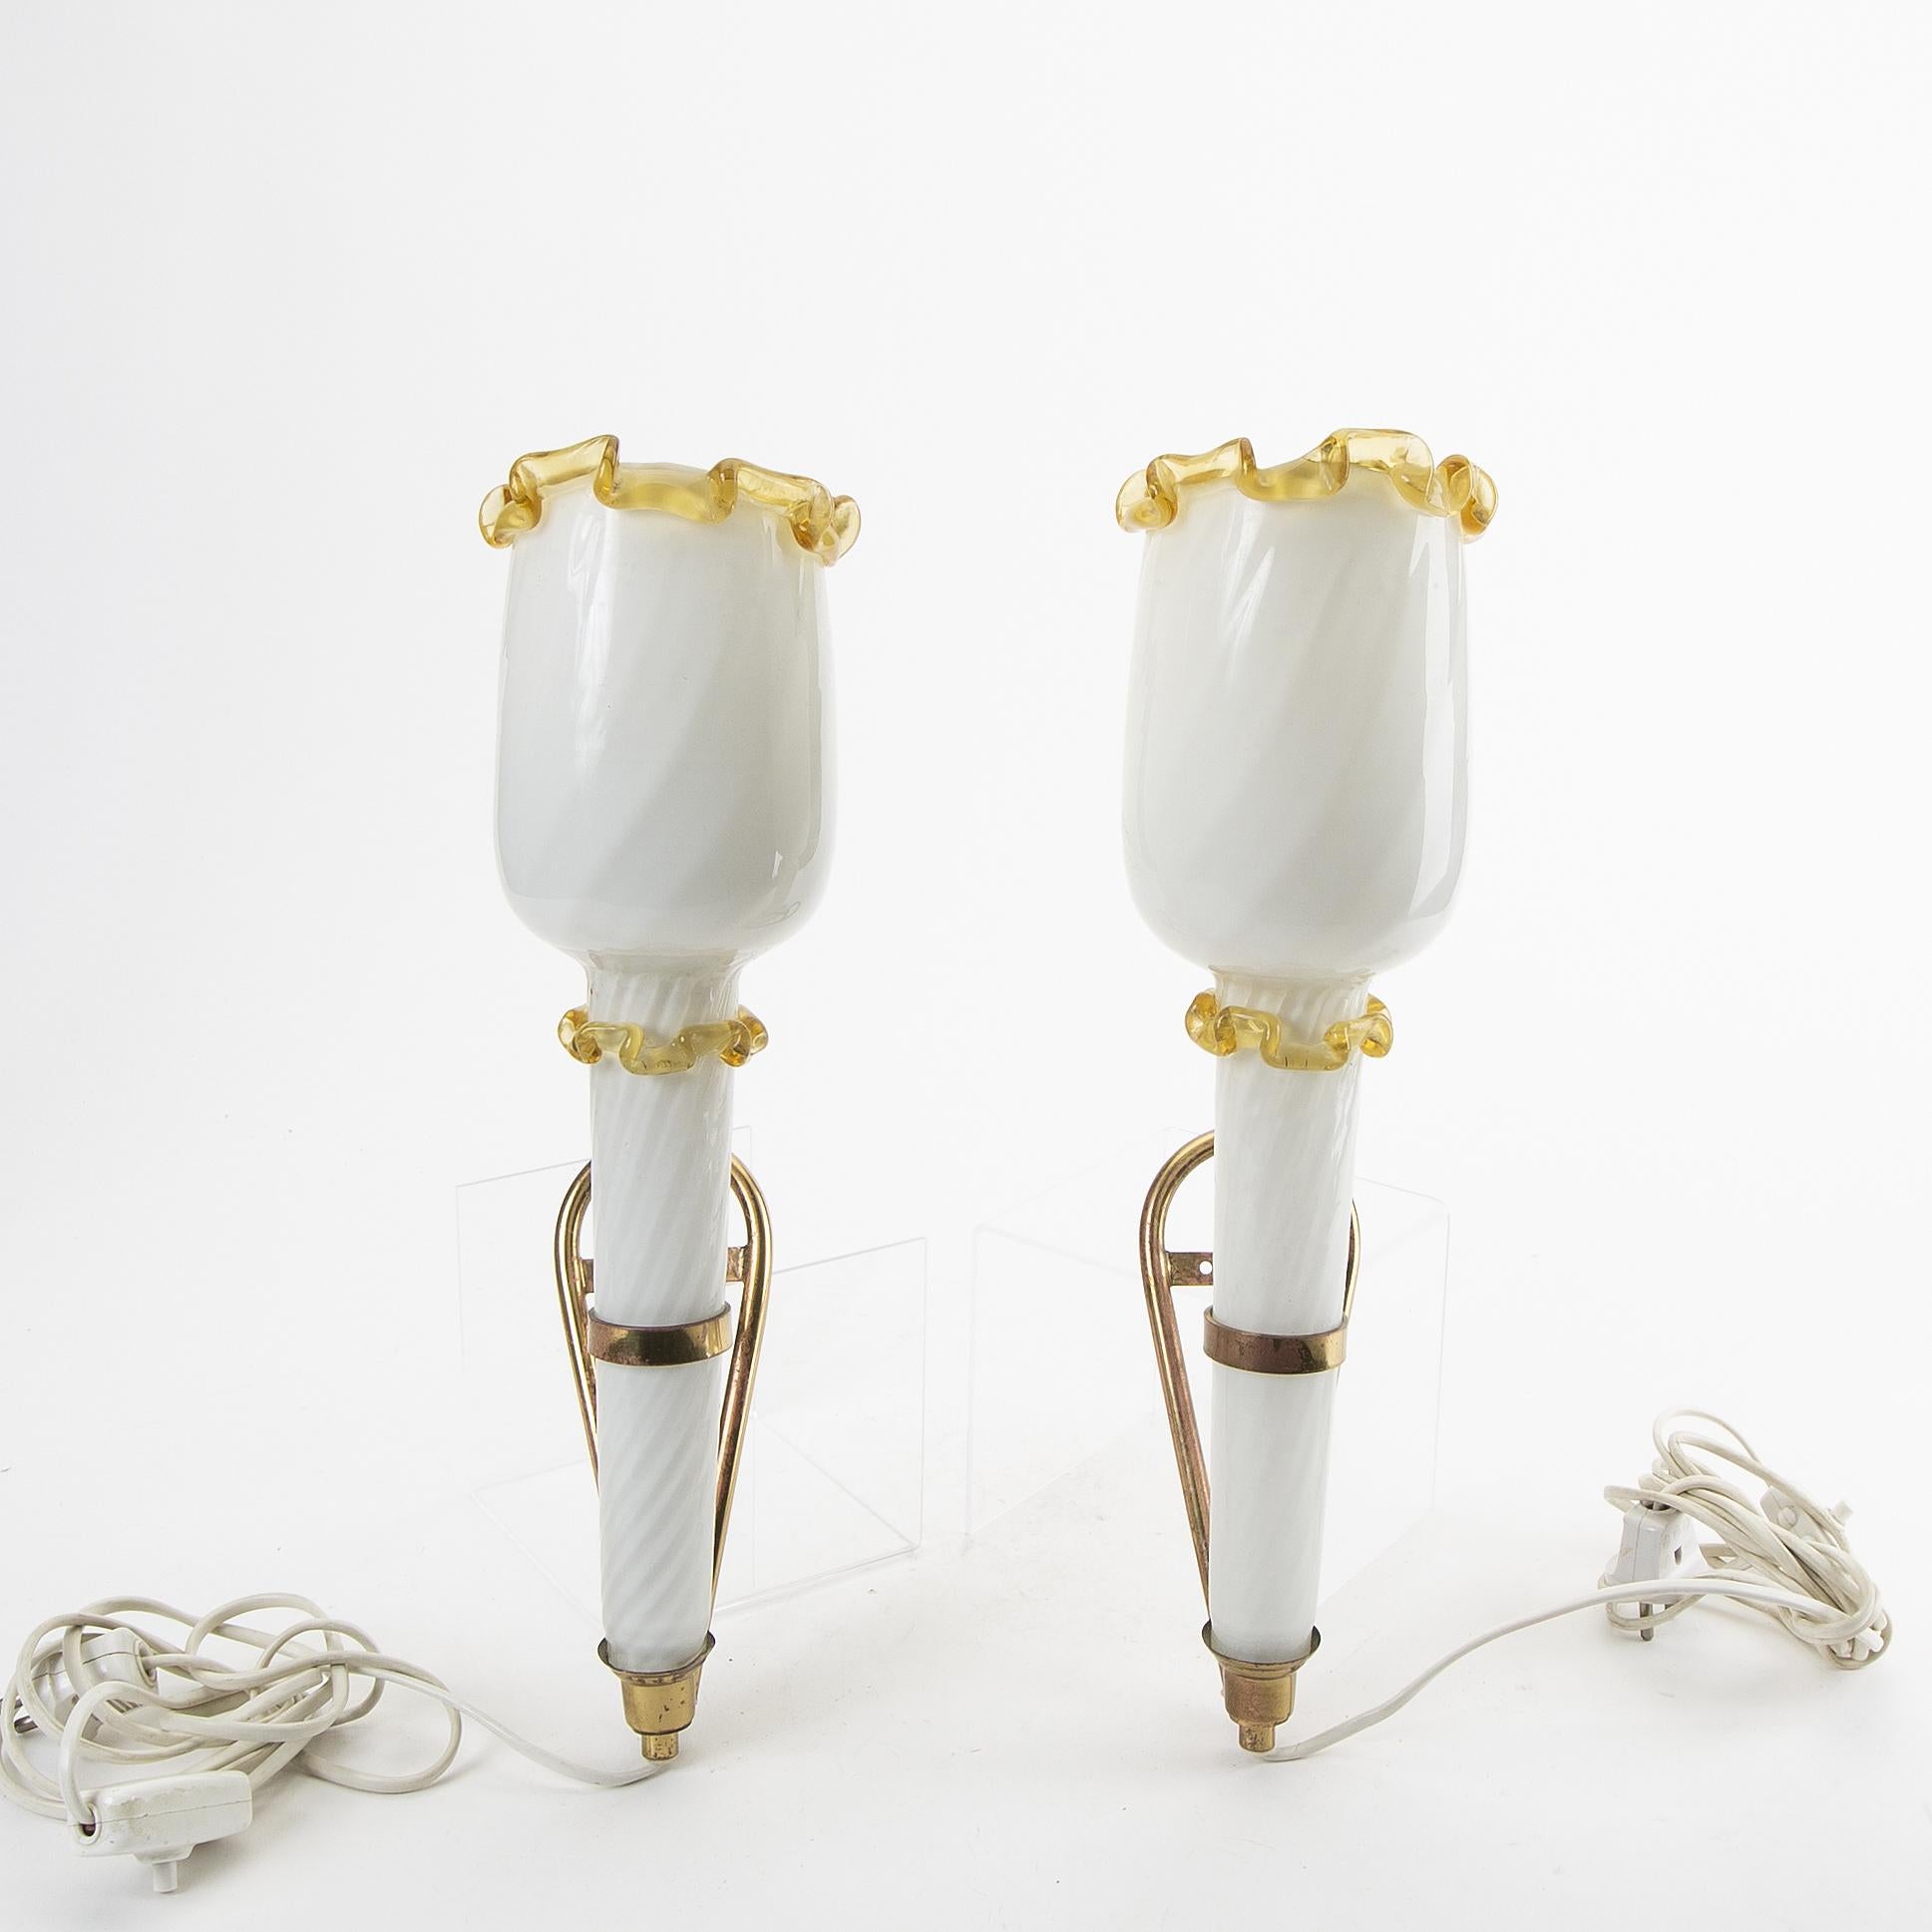 Rare pair of sconces hand made in Murano Italy in 1060. White translucent glass and yellow glass. 
Mounted on brass.
   